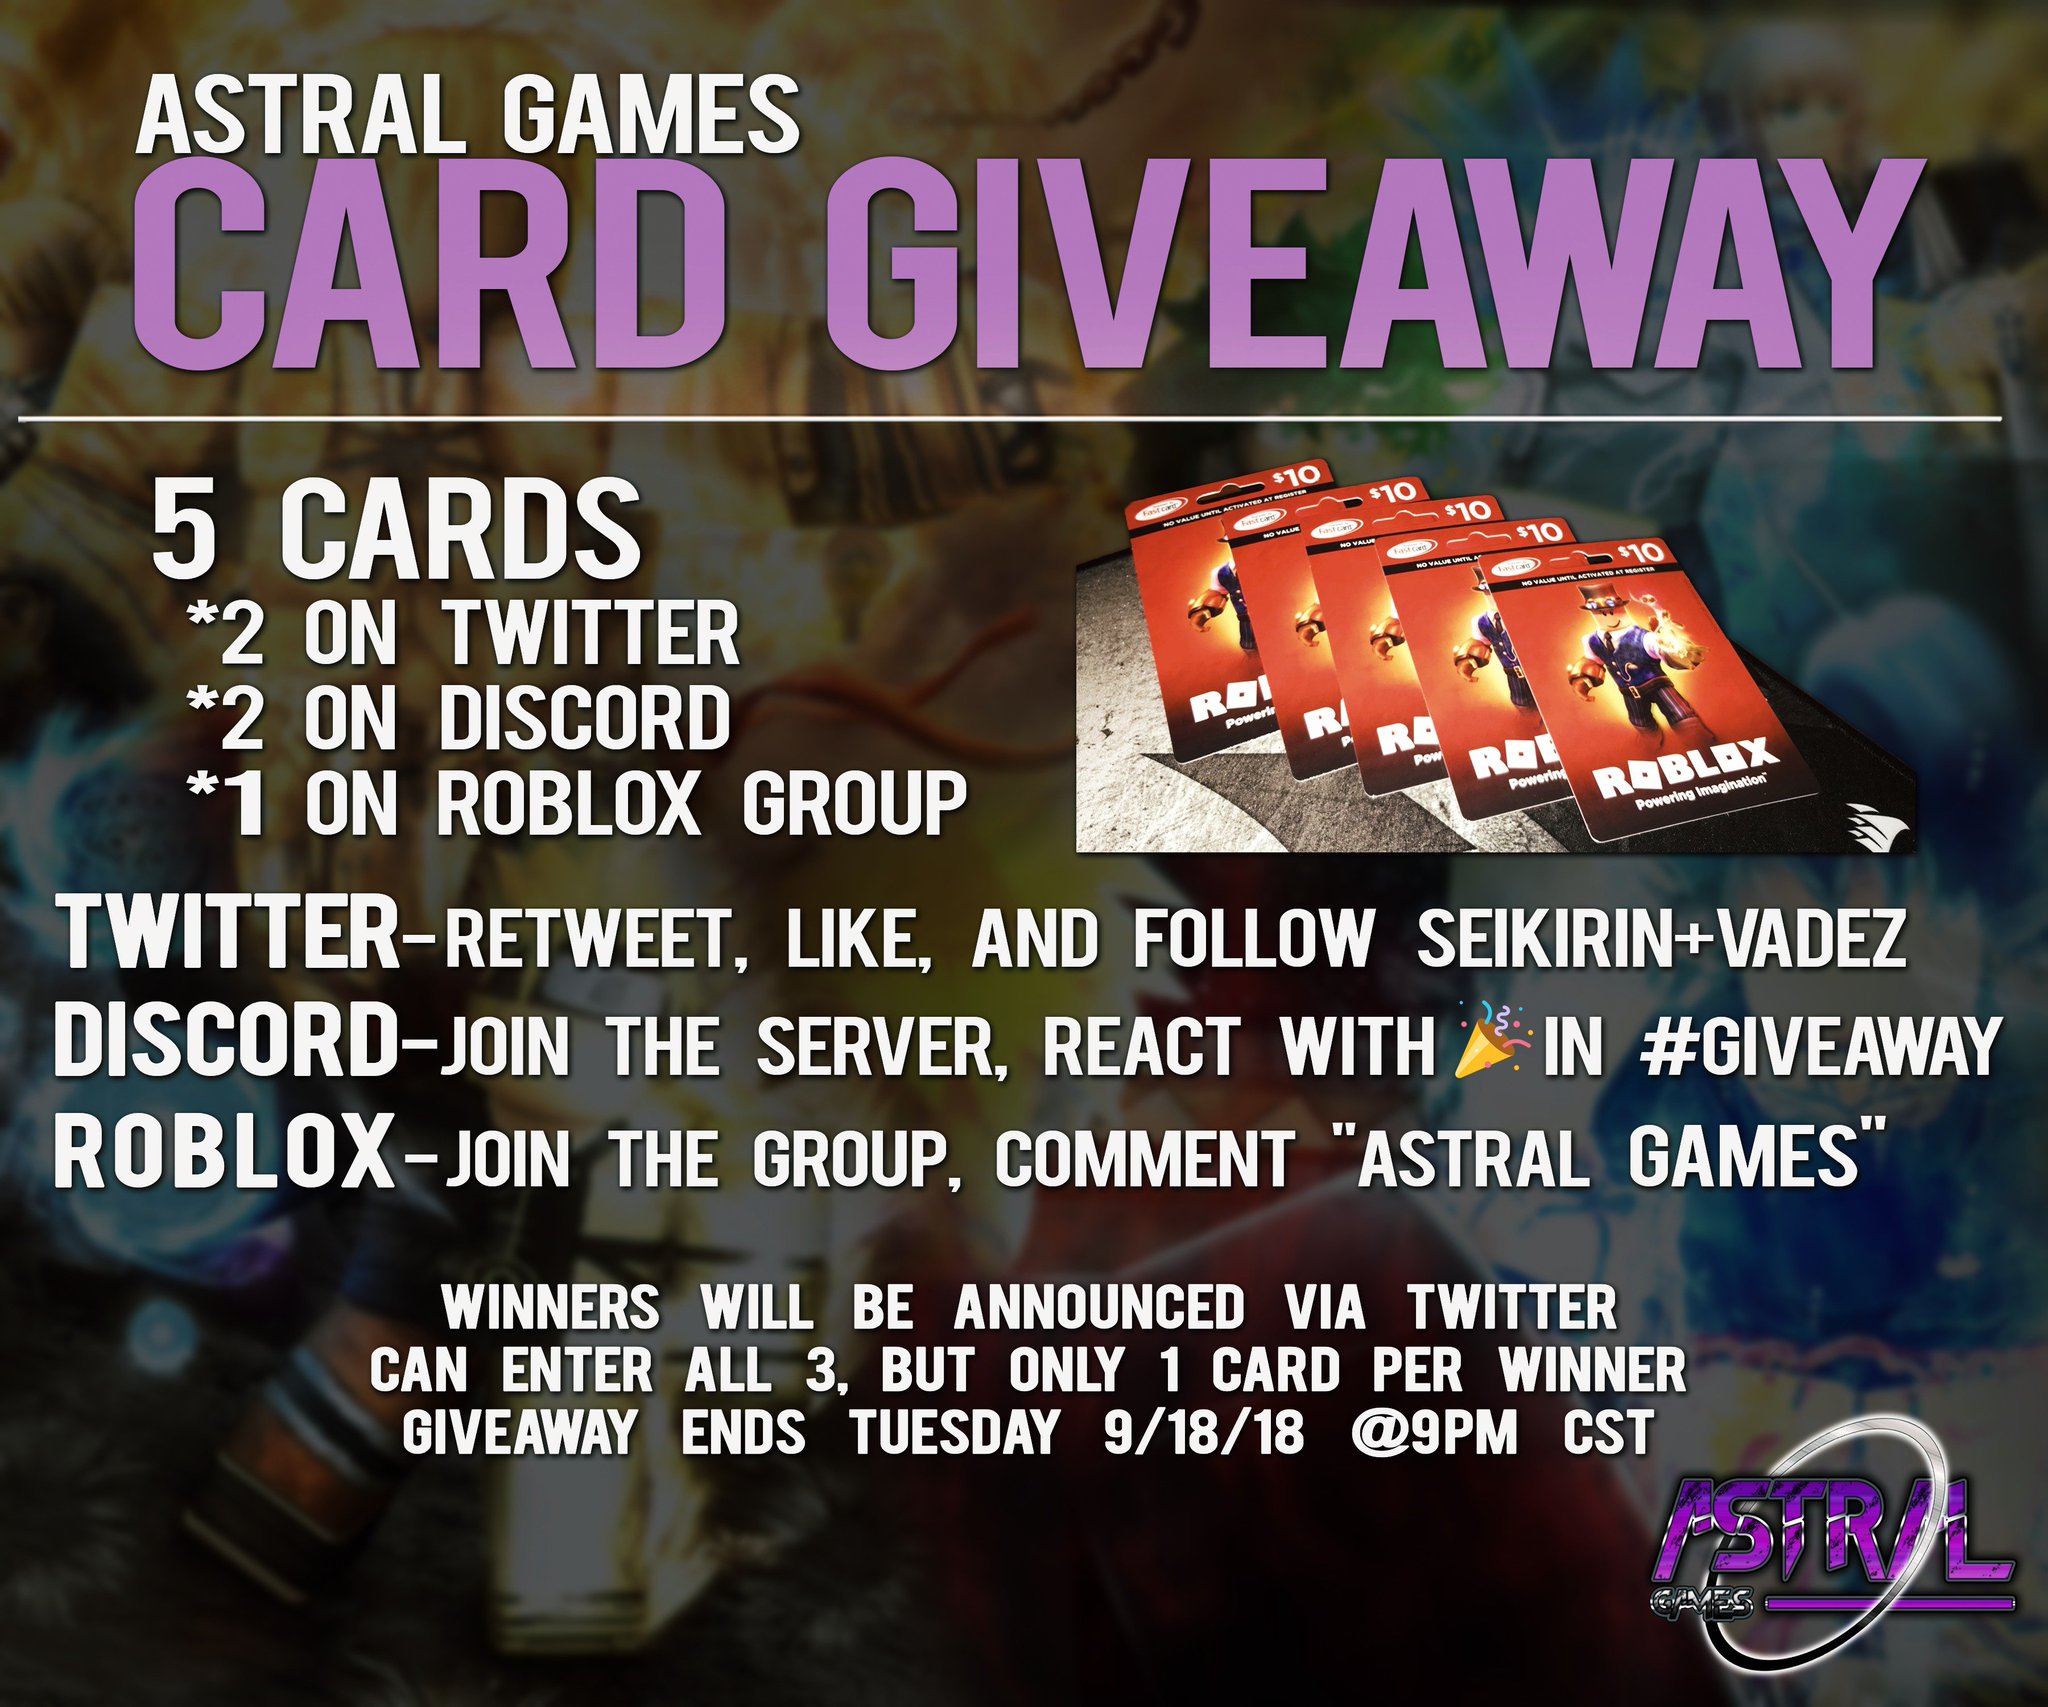 Vadez On Twitter Astral Games Card Giveaway Three Separate Giveaways 5 Chances To Win Rules In Picture Below Theseikirin Https T Co Uxiov88p37 Https T Co Ow9jc7tyuw Https T Co Lthpbn5phh - astral roblox group